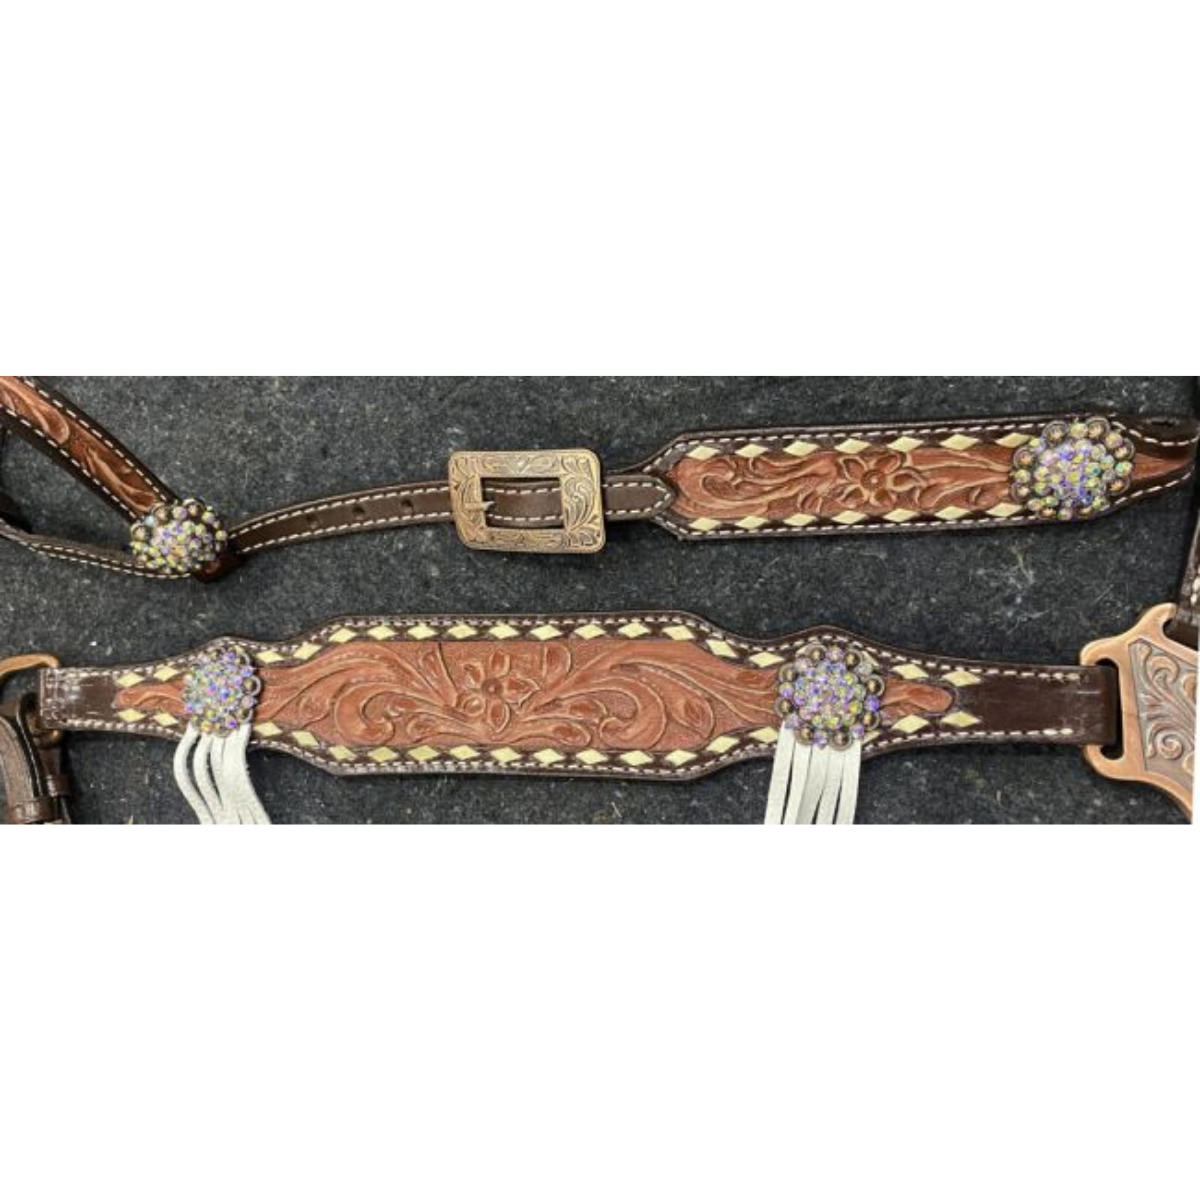 Showman ® Two-Tone Tooled Single Ear Headstall and Breast Collar Set with rawhide lacing and fringe accents. - Double T Saddles